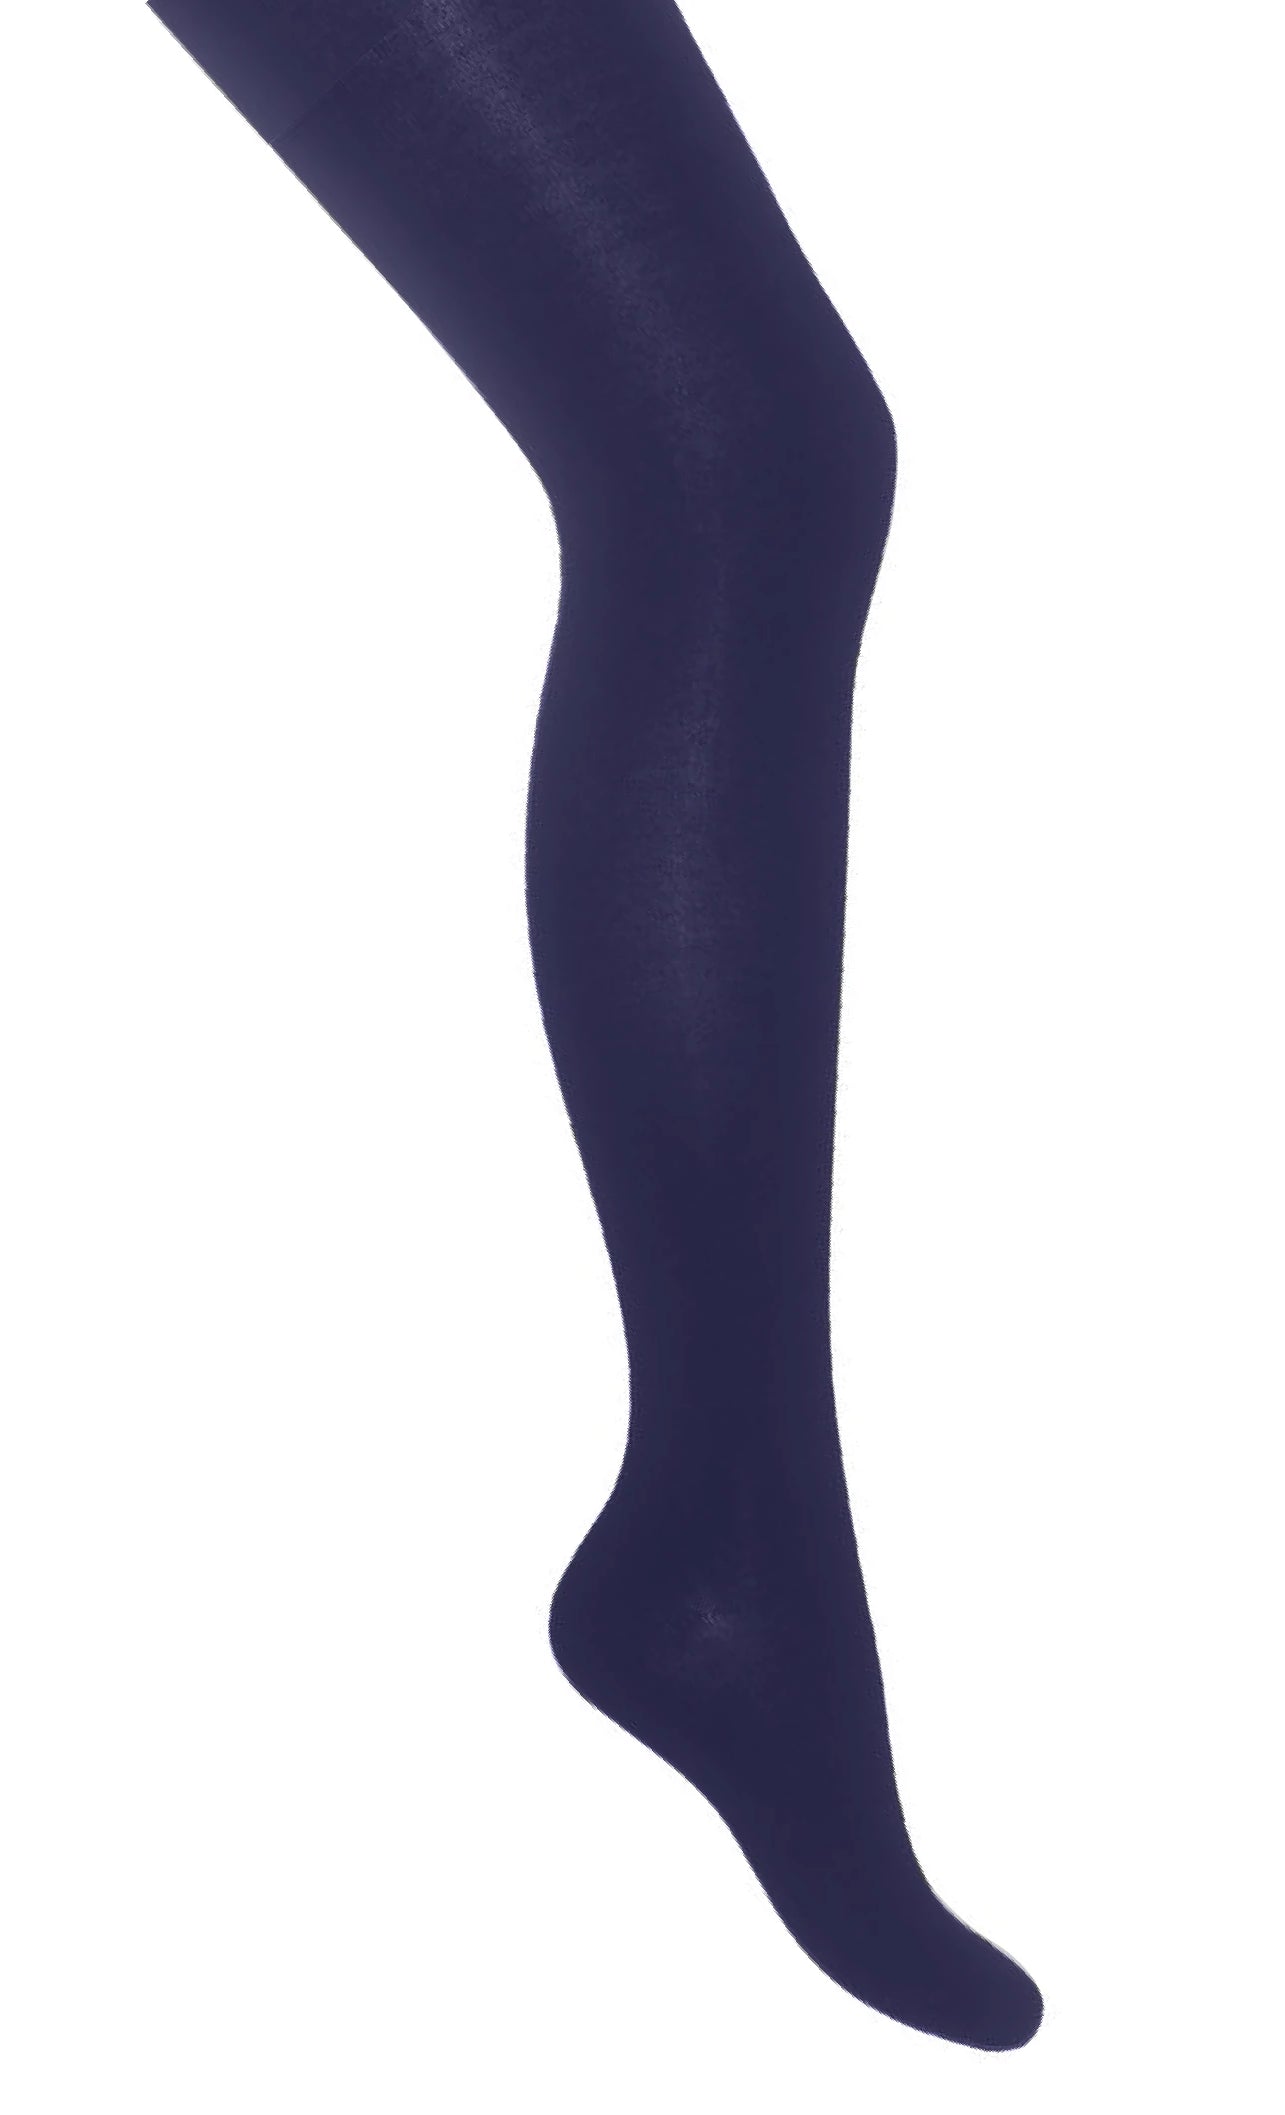 Bonnie Doon Cotton Tights - navy blue knitted Winter thermal warm tights